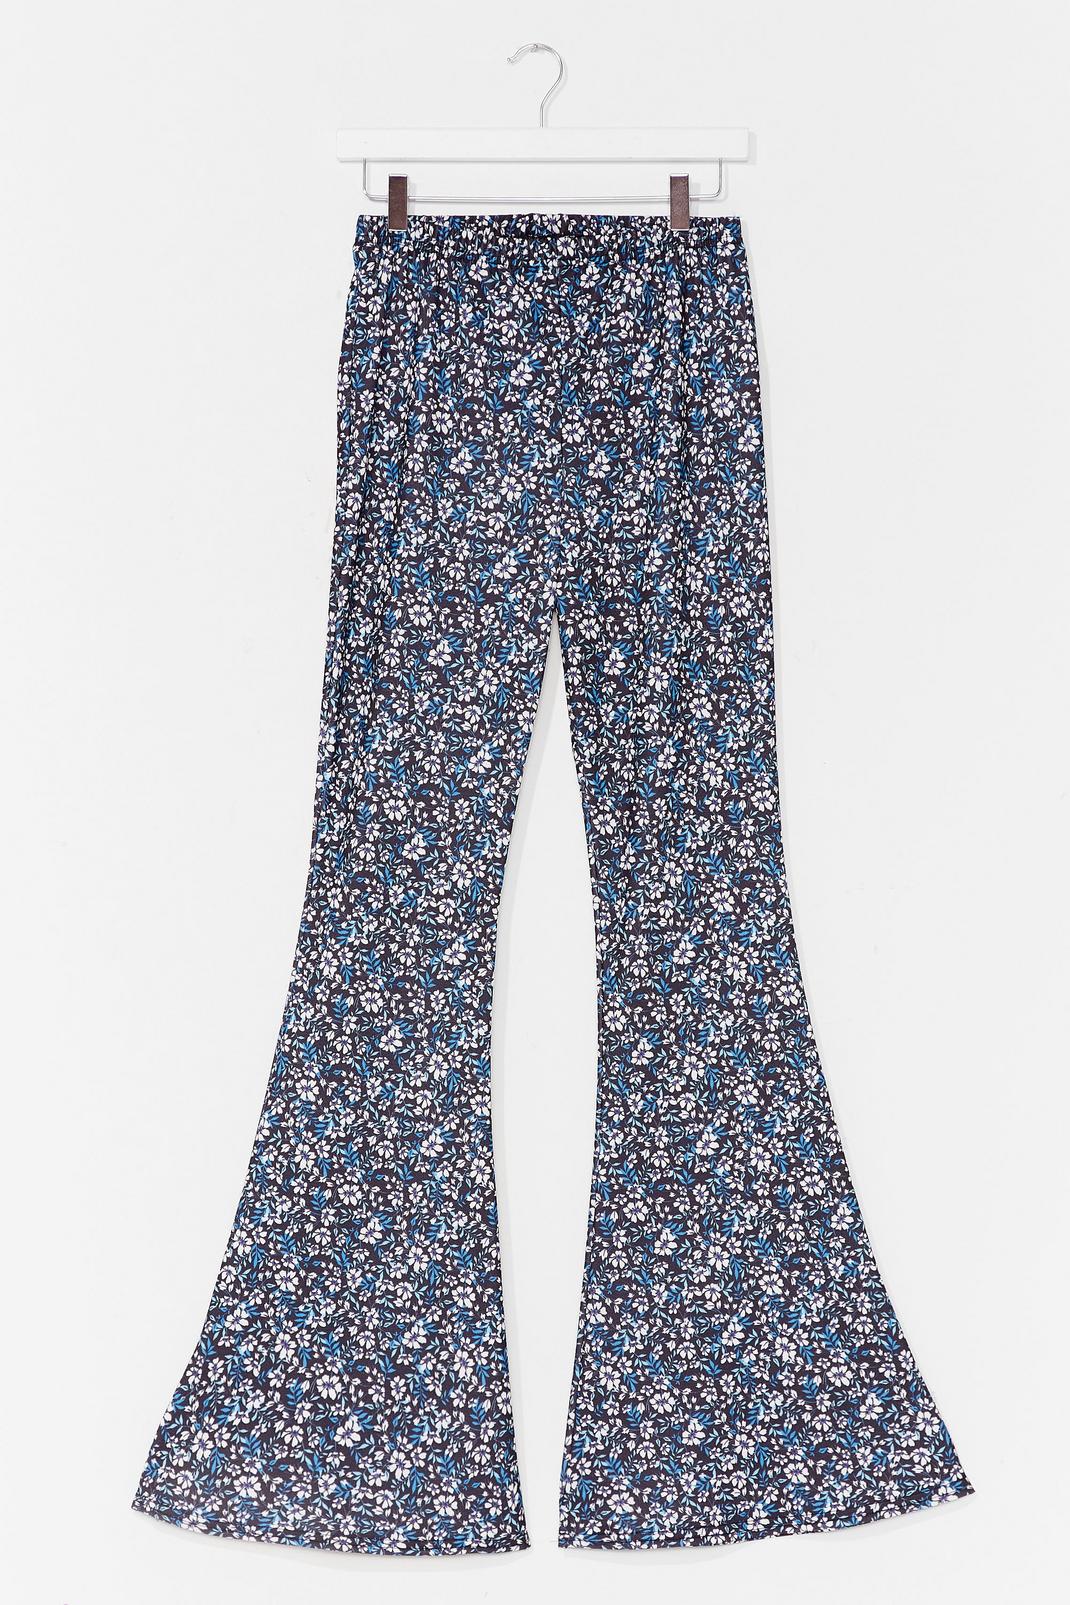 Flare to Be Different Floral High-Waisted Pants image number 1